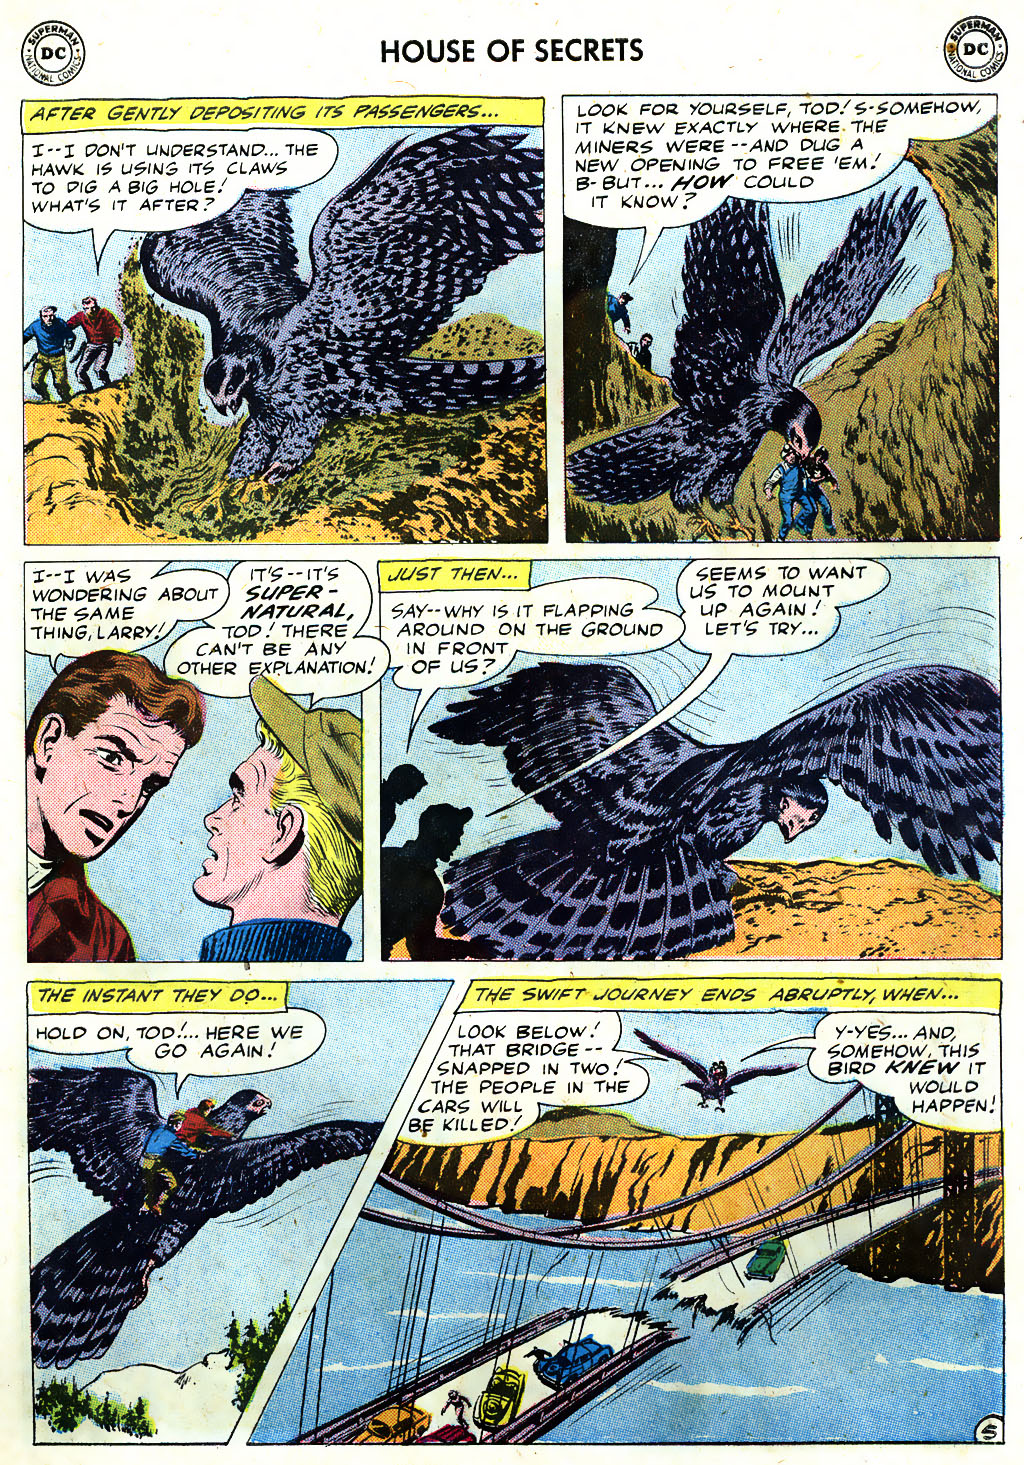 House of Secrets (1956) Issue #33 #33 - English 7